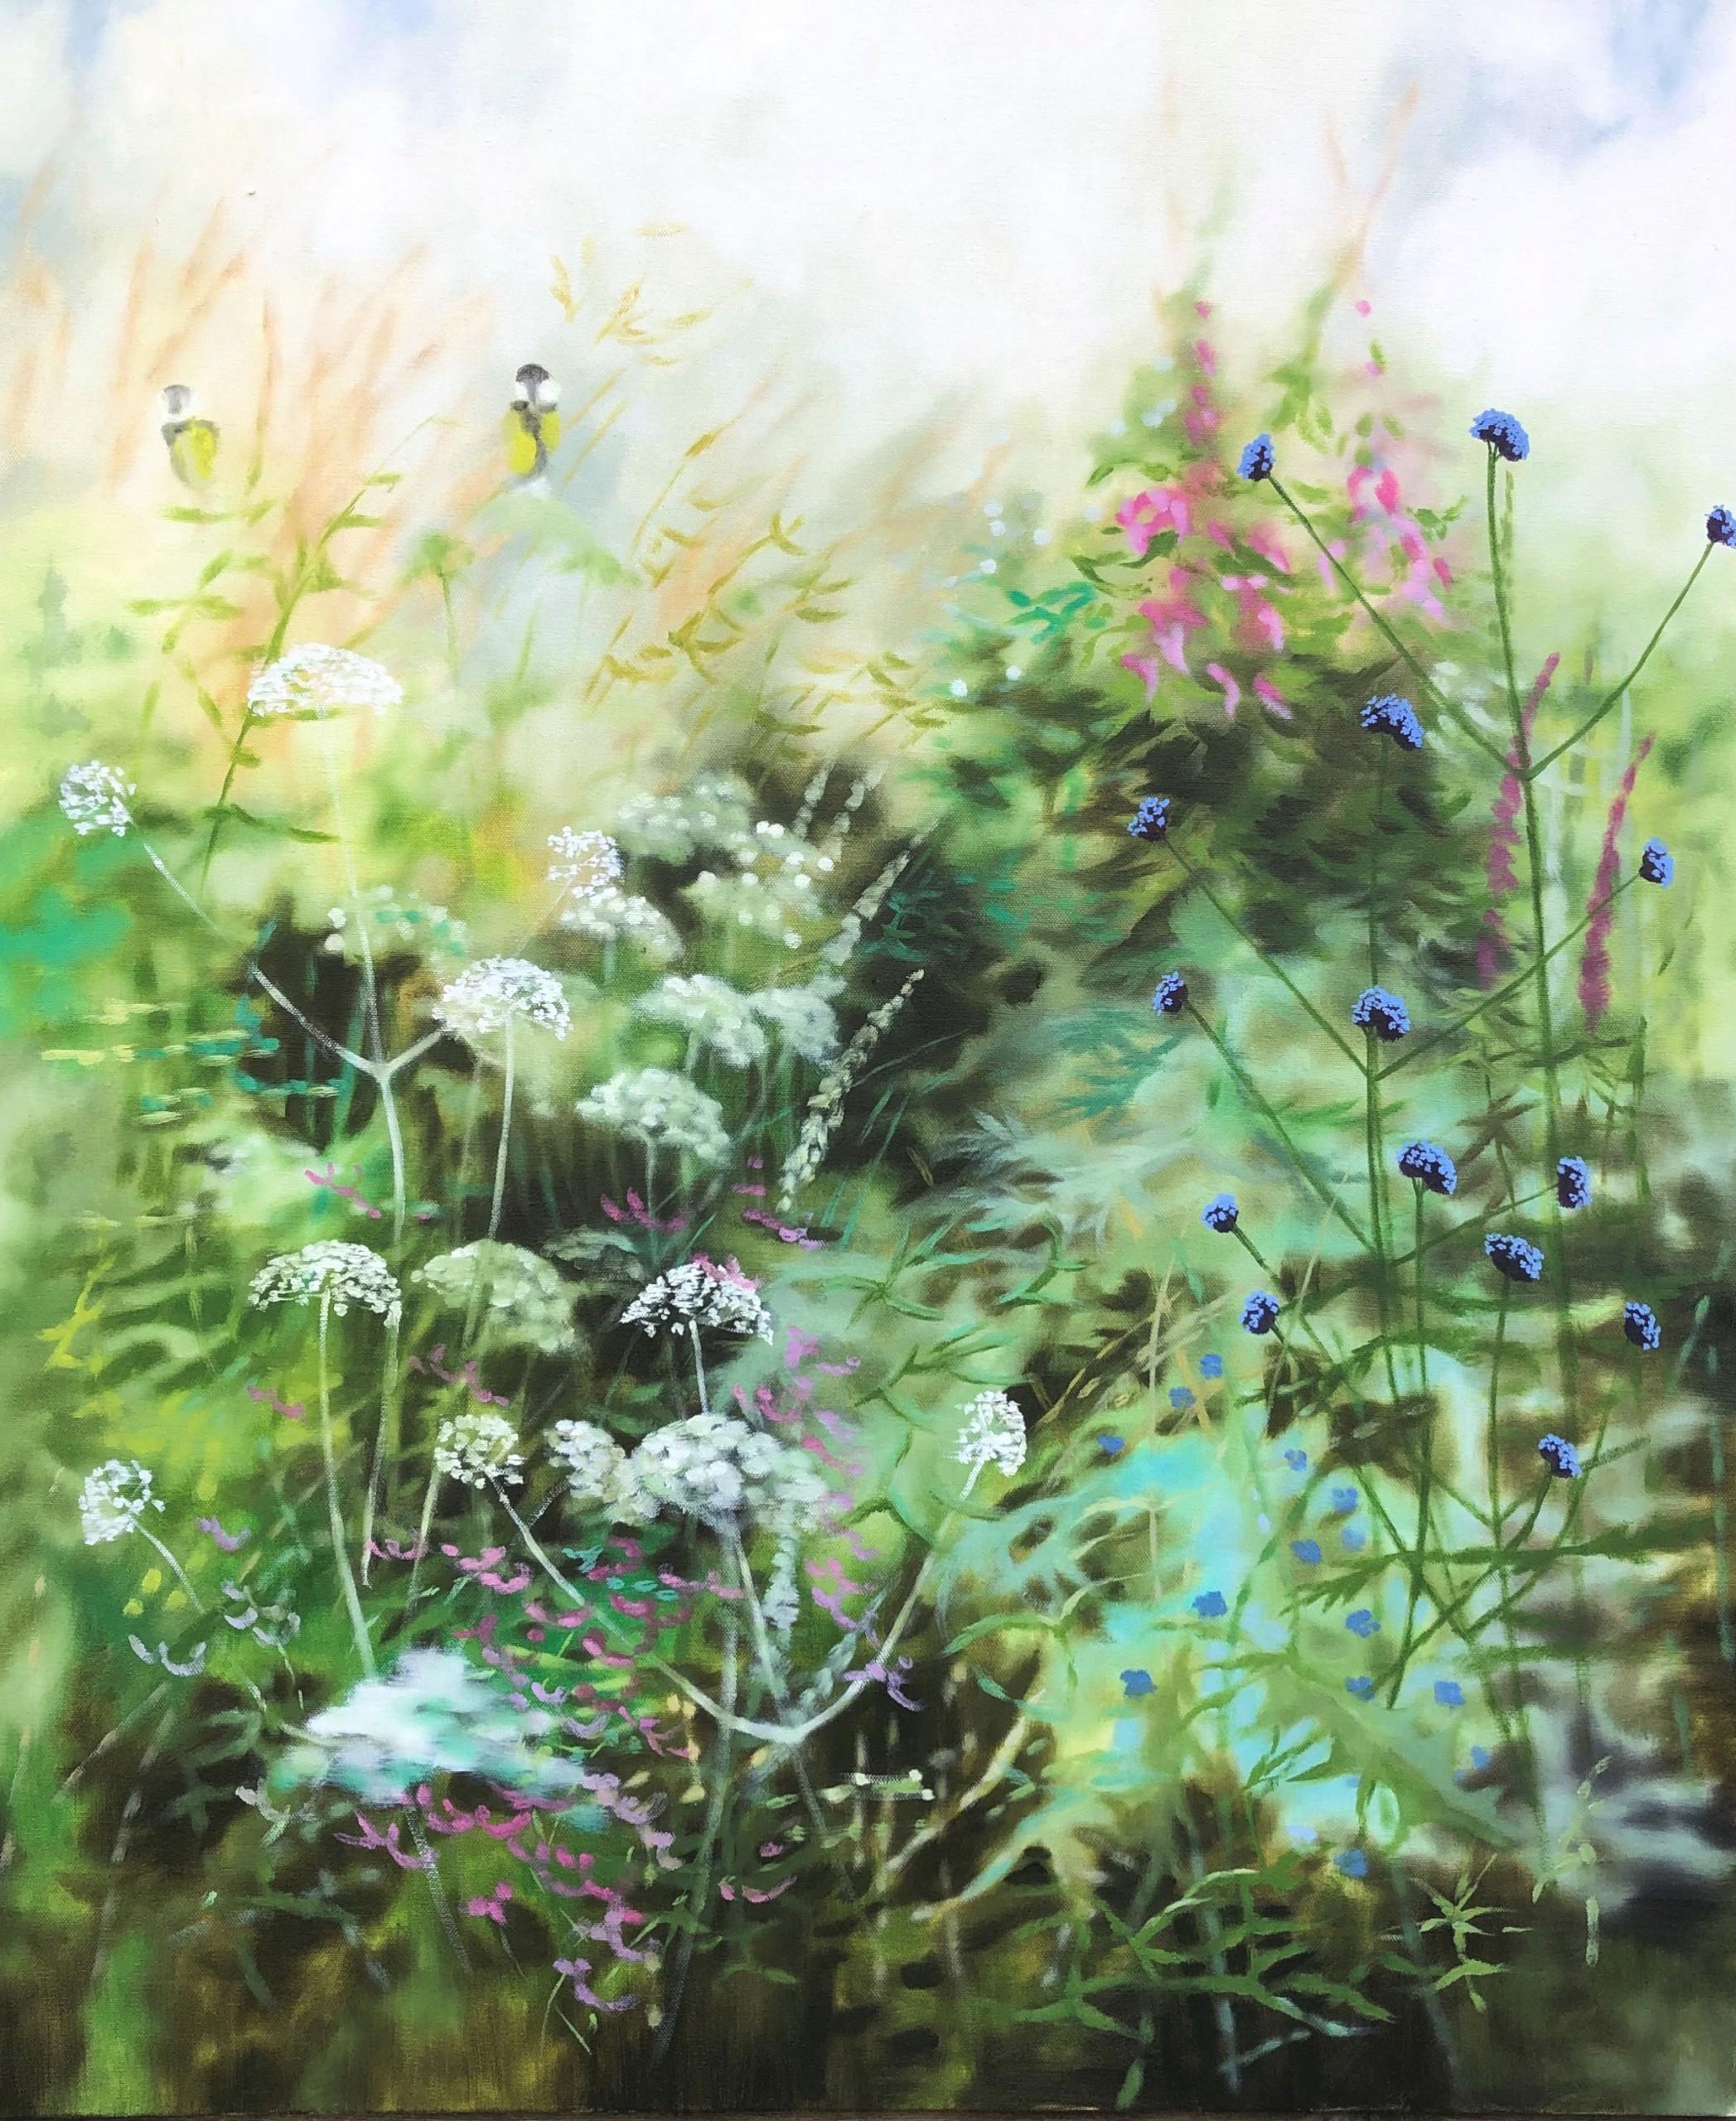 Garden Edge with Oil on Canvas, Painting by Dylan Lloyd